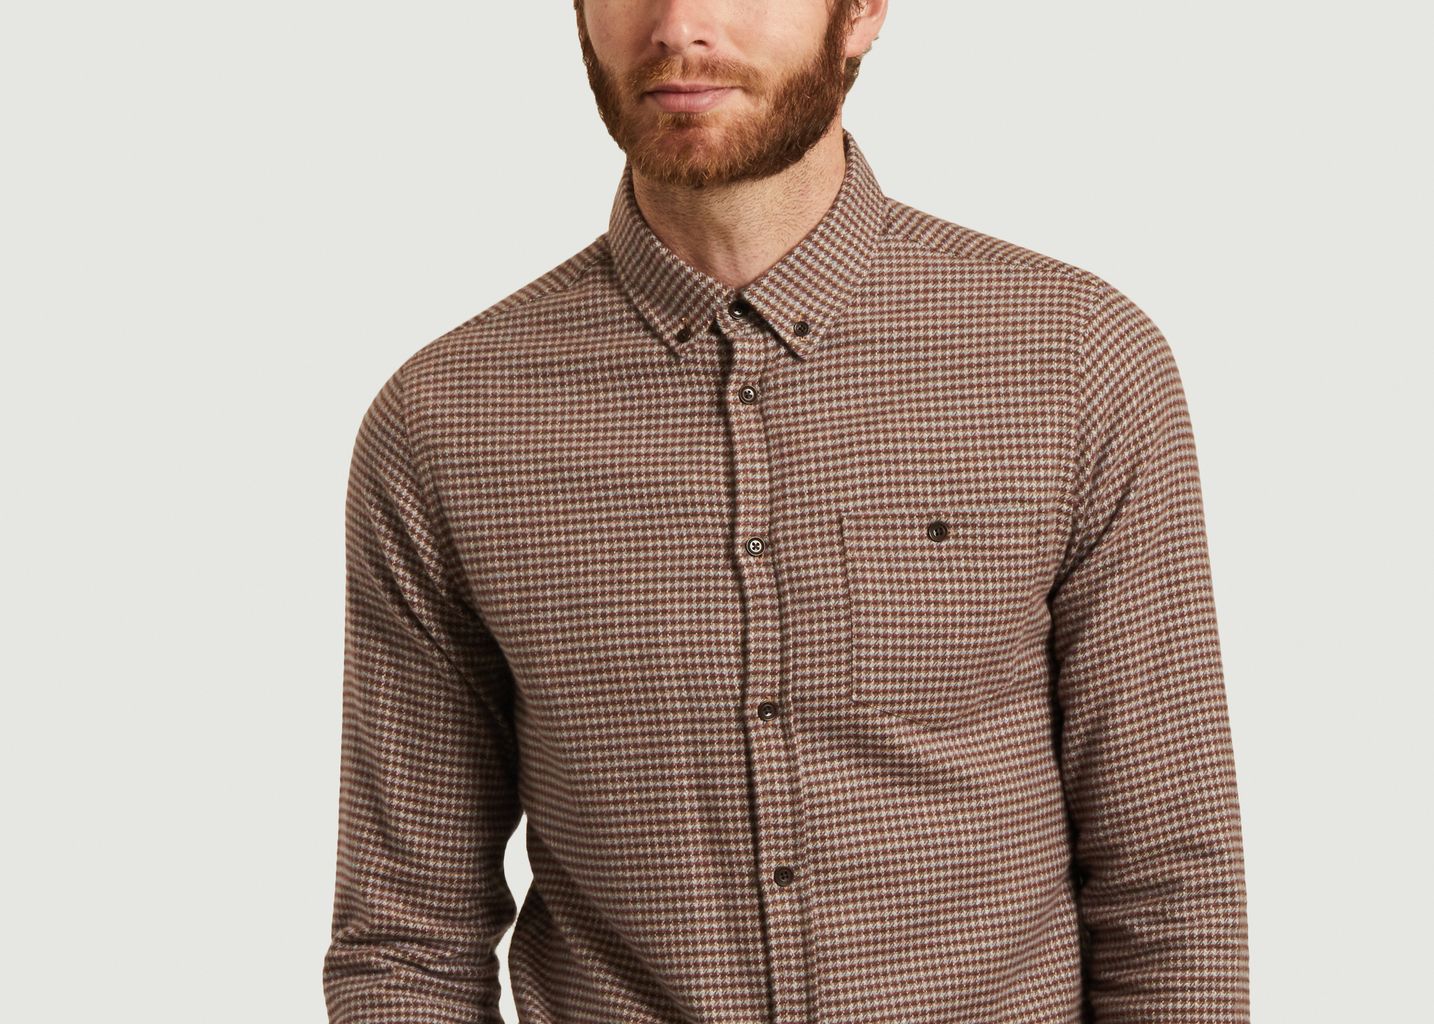 Hermann houndstooth pattern flannel shirt - Olow